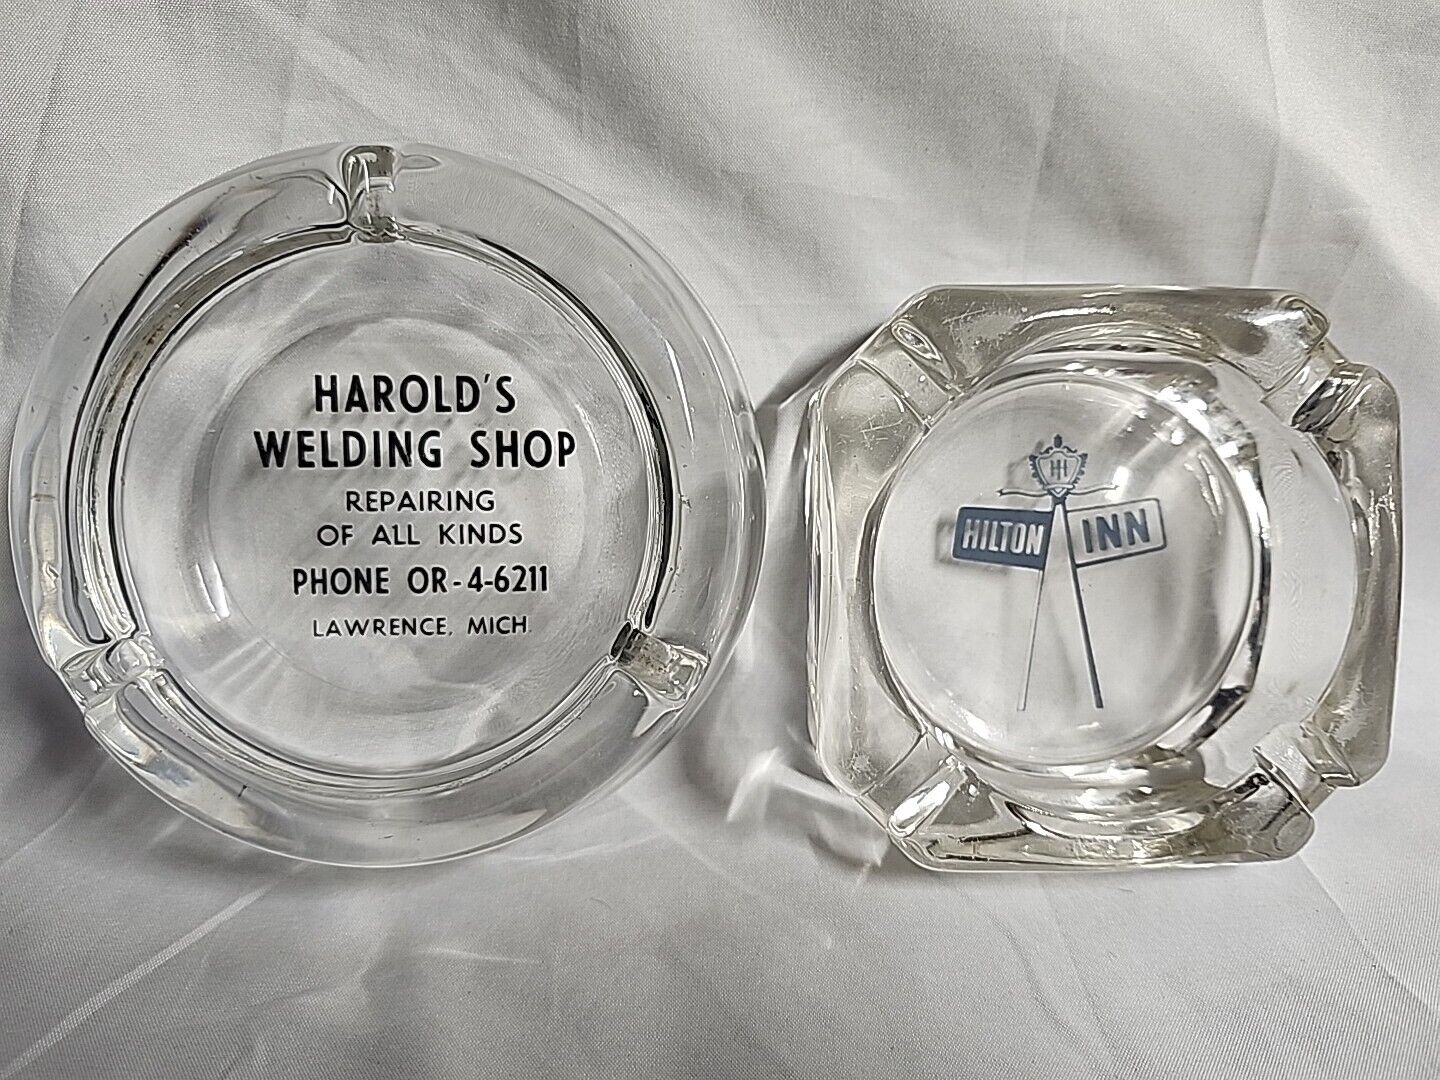 Vintage Hilton Inn Advertising Glass Square Ashtray And Round Welding Shop Mich